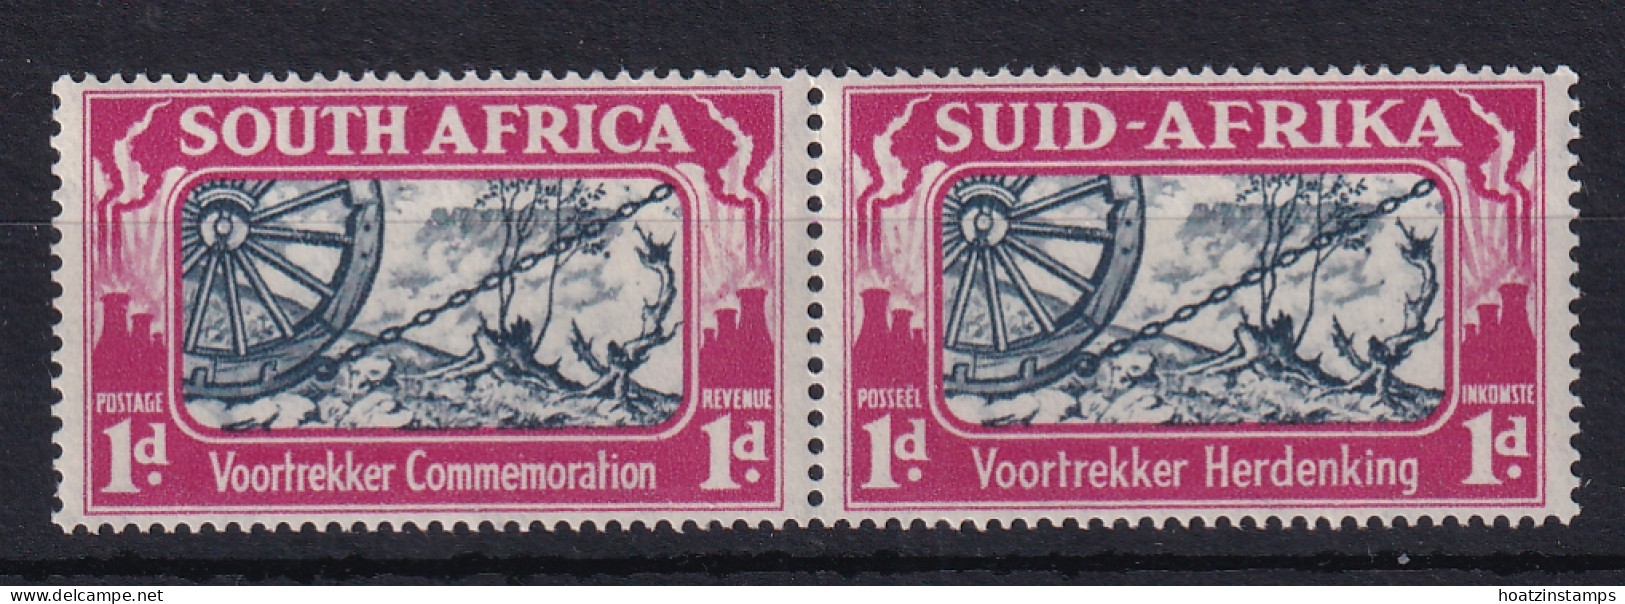 South Africa: 1938   Voortrekker Commemoration  SG80   1d   MH Pair - Unused Stamps